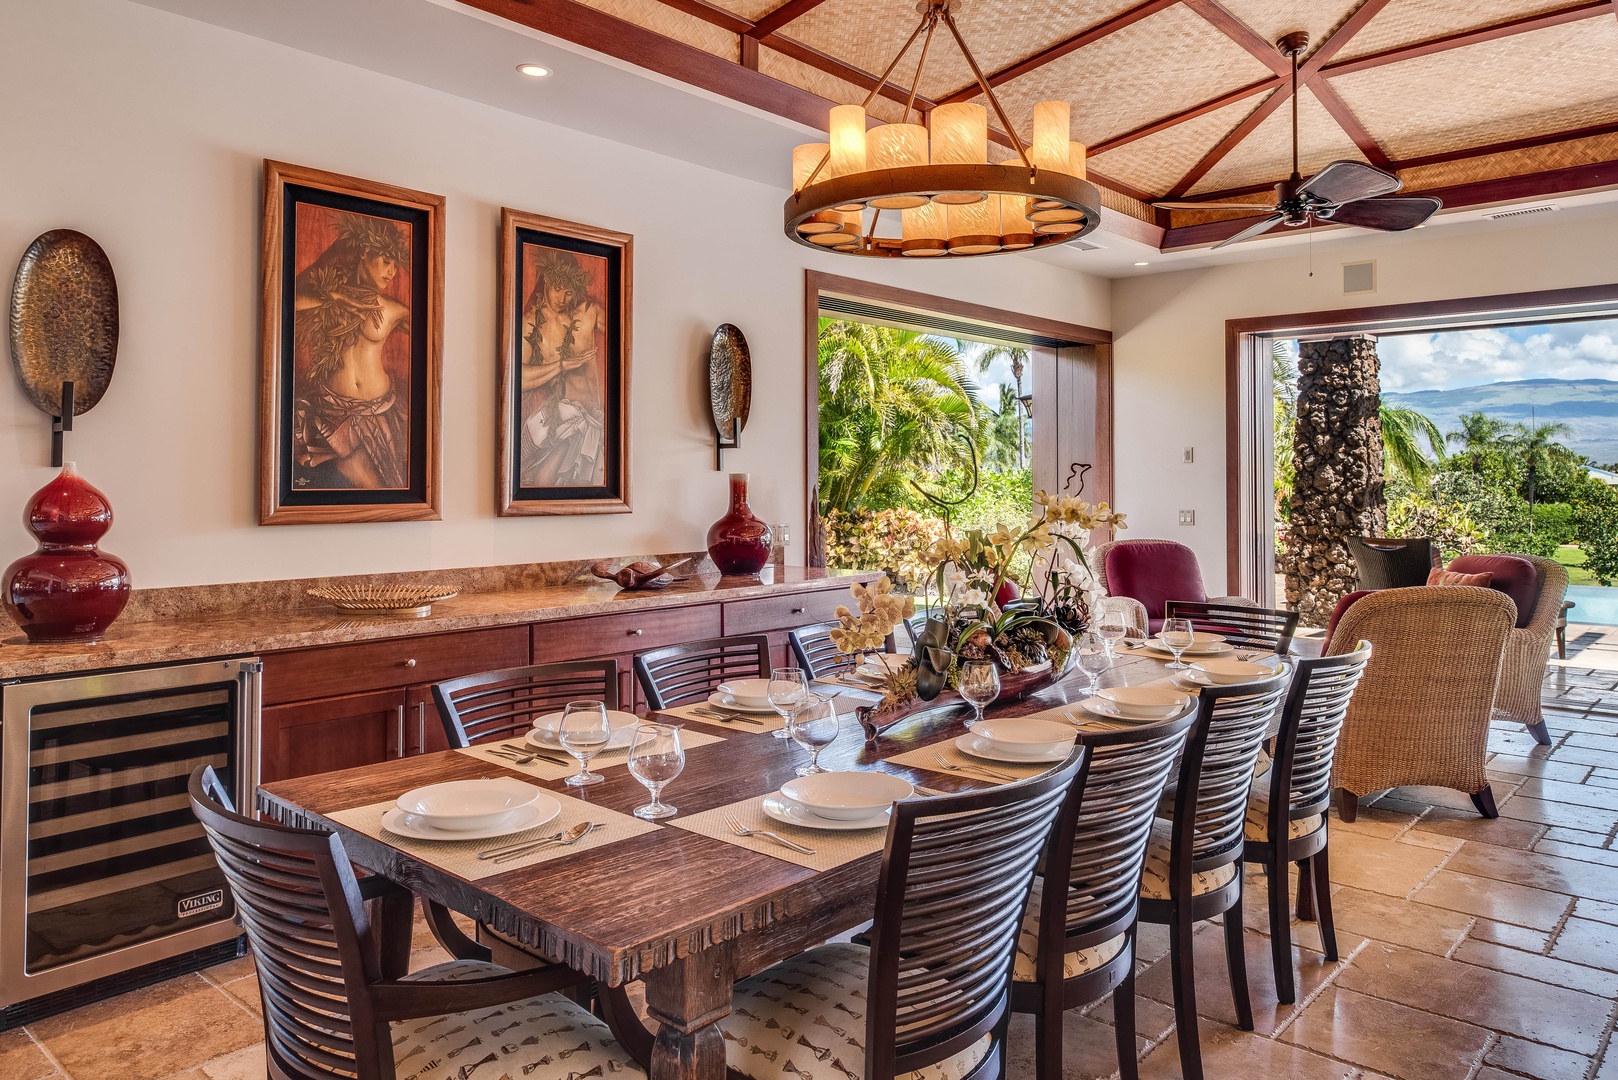 Kamuela Vacation Rentals, House of the Turtle at Champion Ridge, Mauna Lani (CR 18) - Alternate View of Indoor Dining